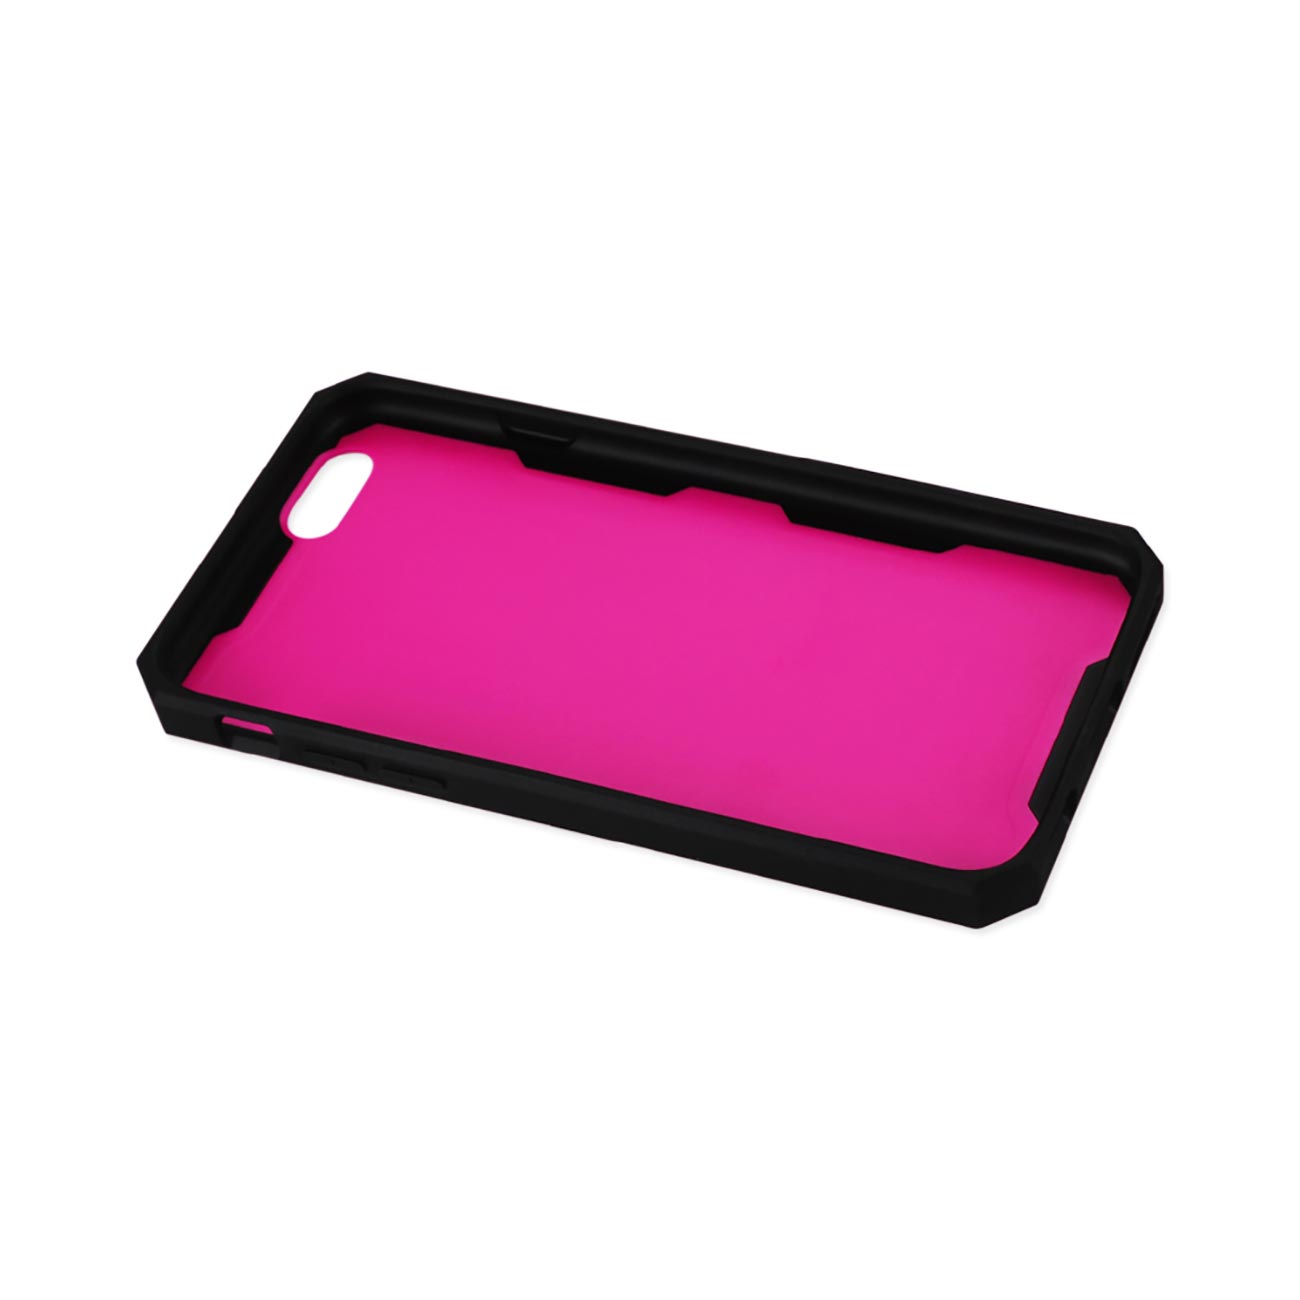 iPhone 6 Dual Color Transformer Case In Hot Pink Black